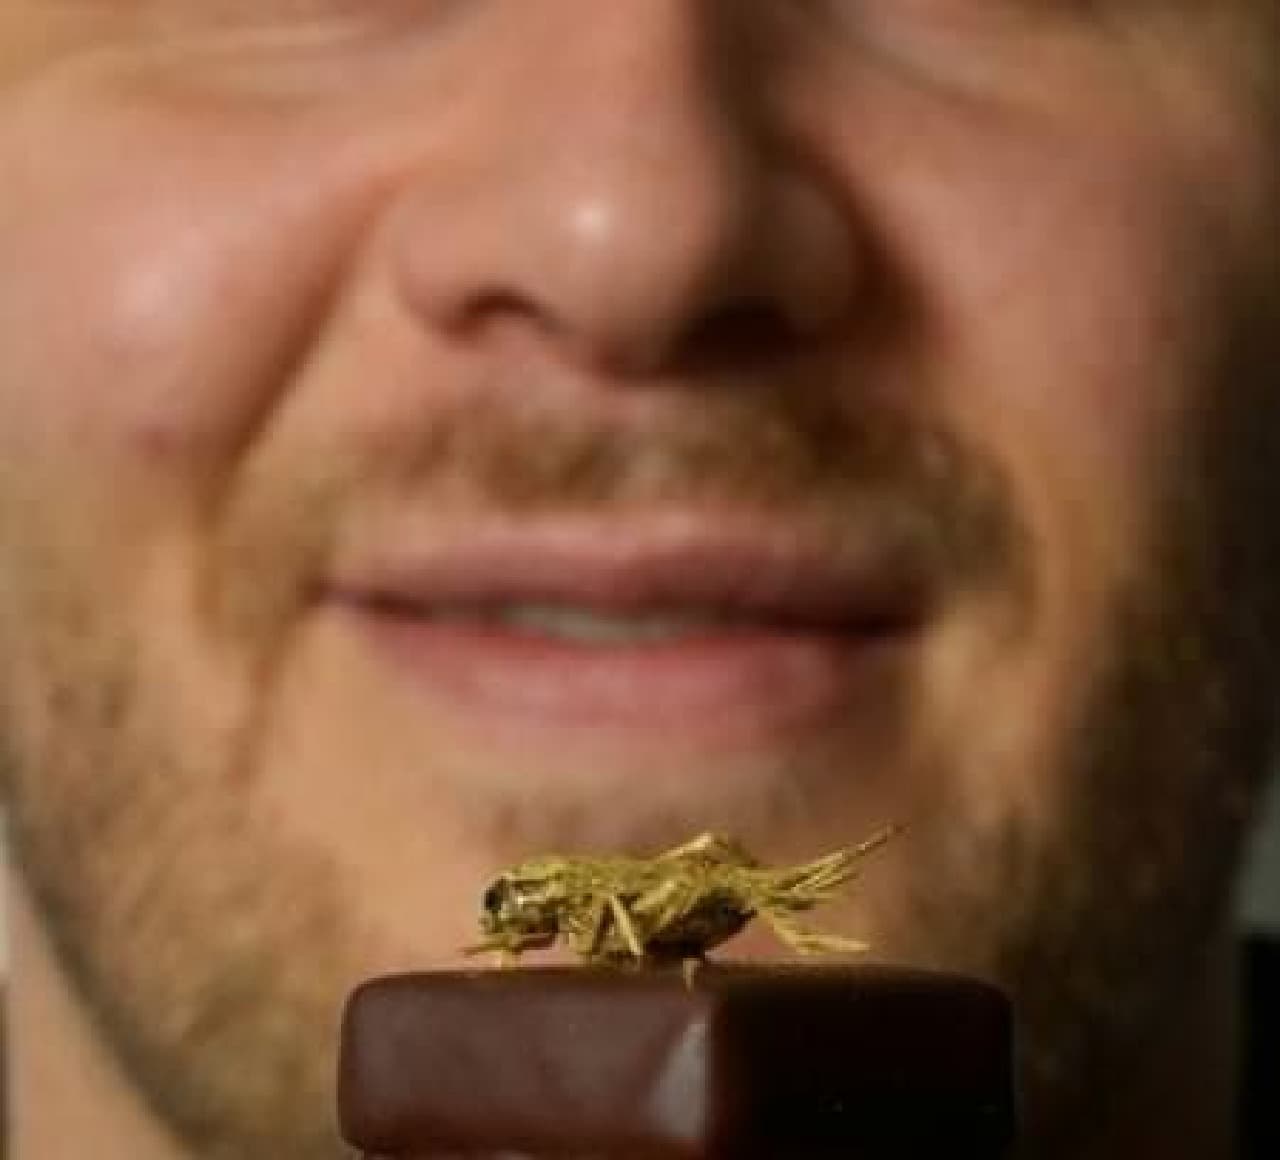 "If you can't eat insects, you can eat them on chocolate."